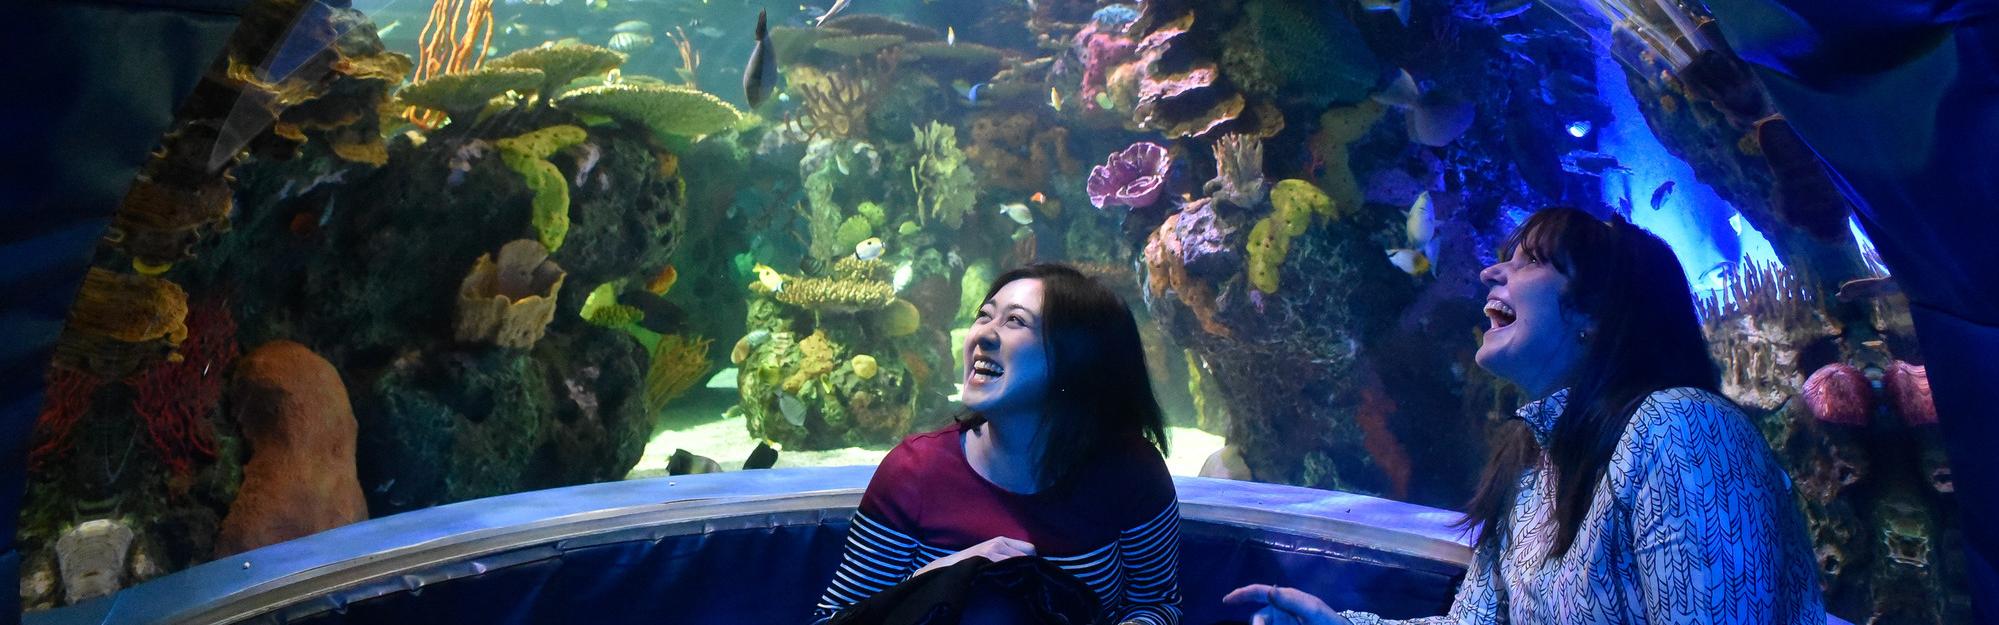 Two students in a large aquarium looking up at a tank full of sea life